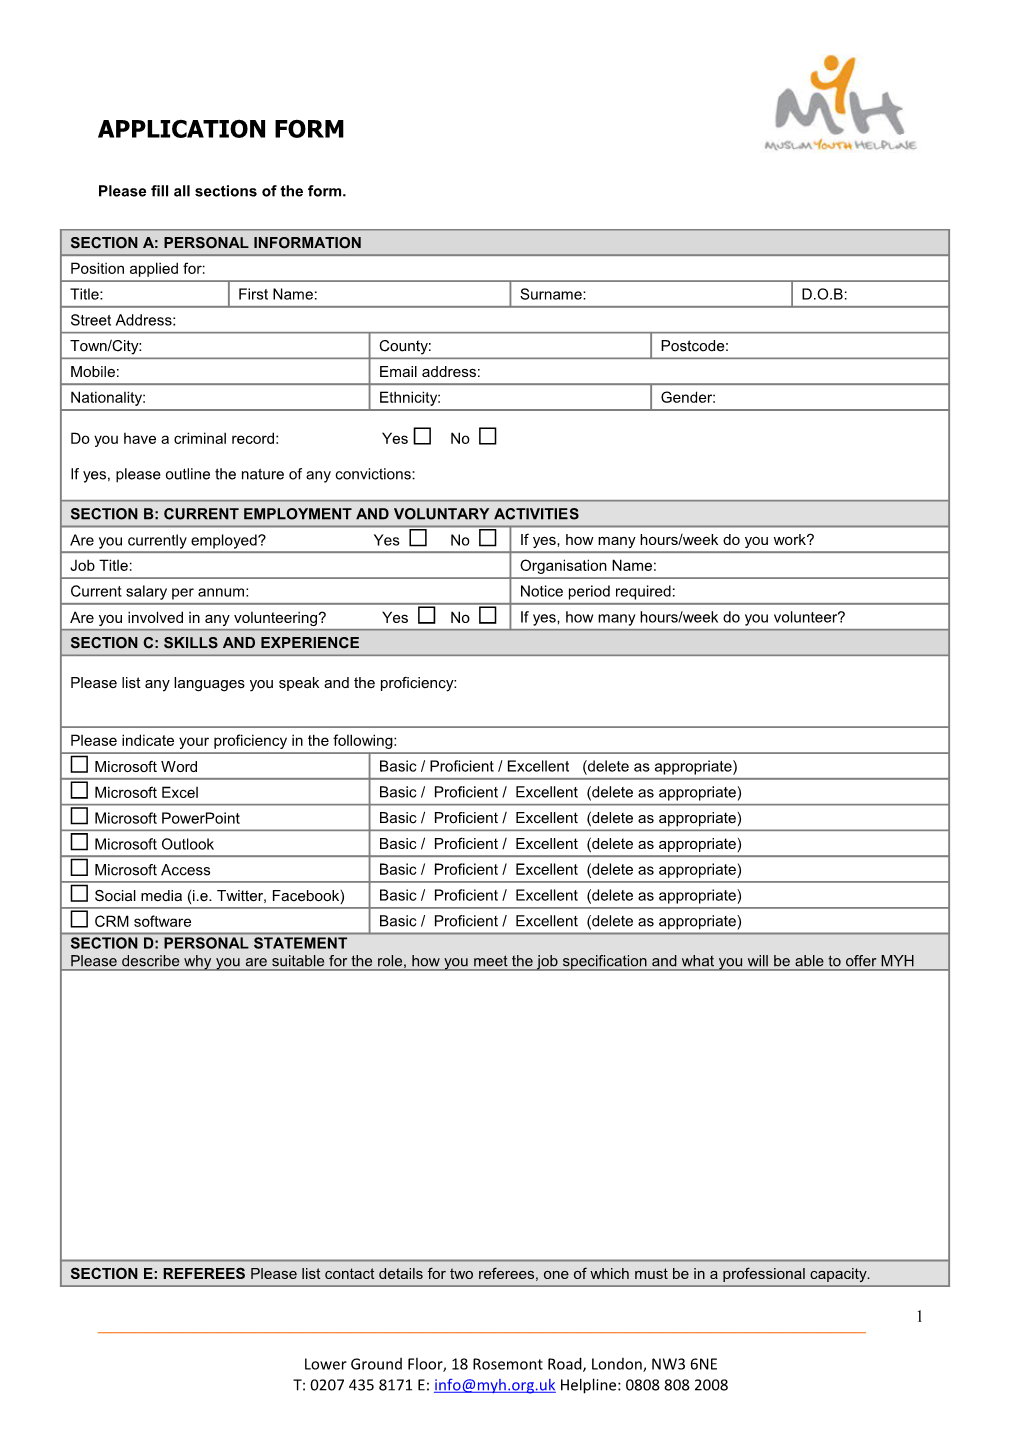 Please Fill All Sections of the Form